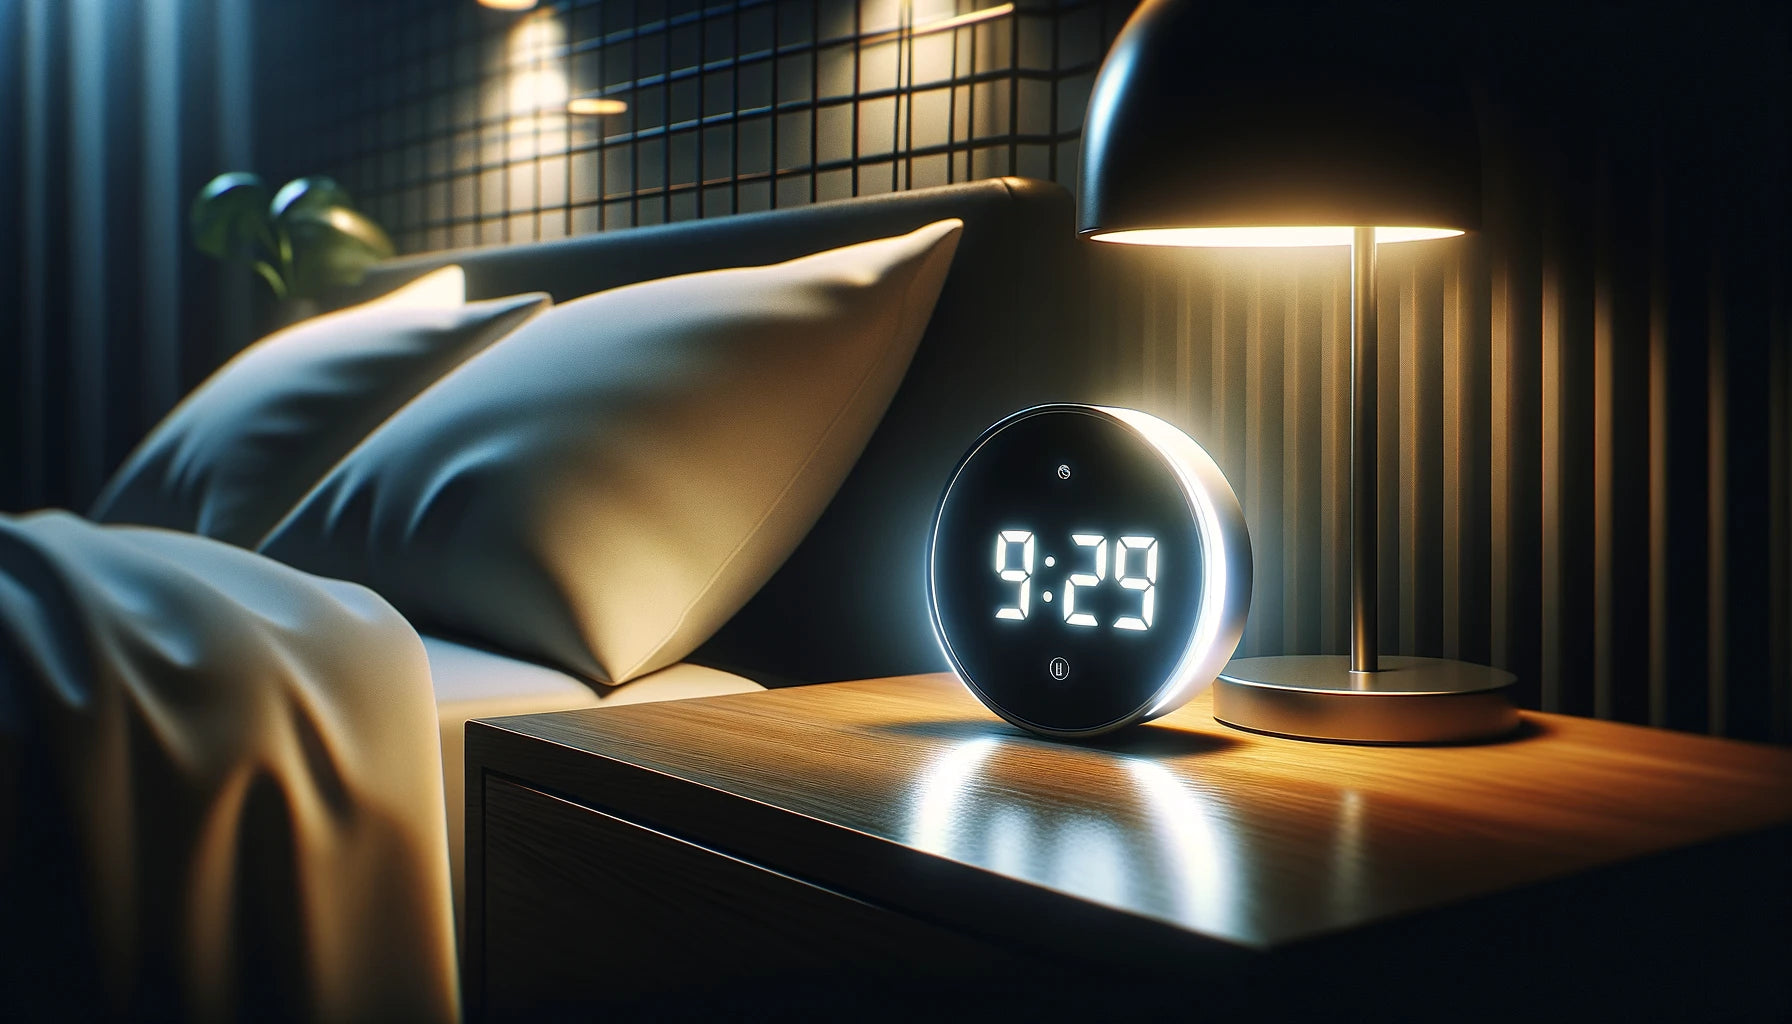 WHAT ARE THE BENEFITS OF USING AN LED NIGHT LIGHT CLOCK?